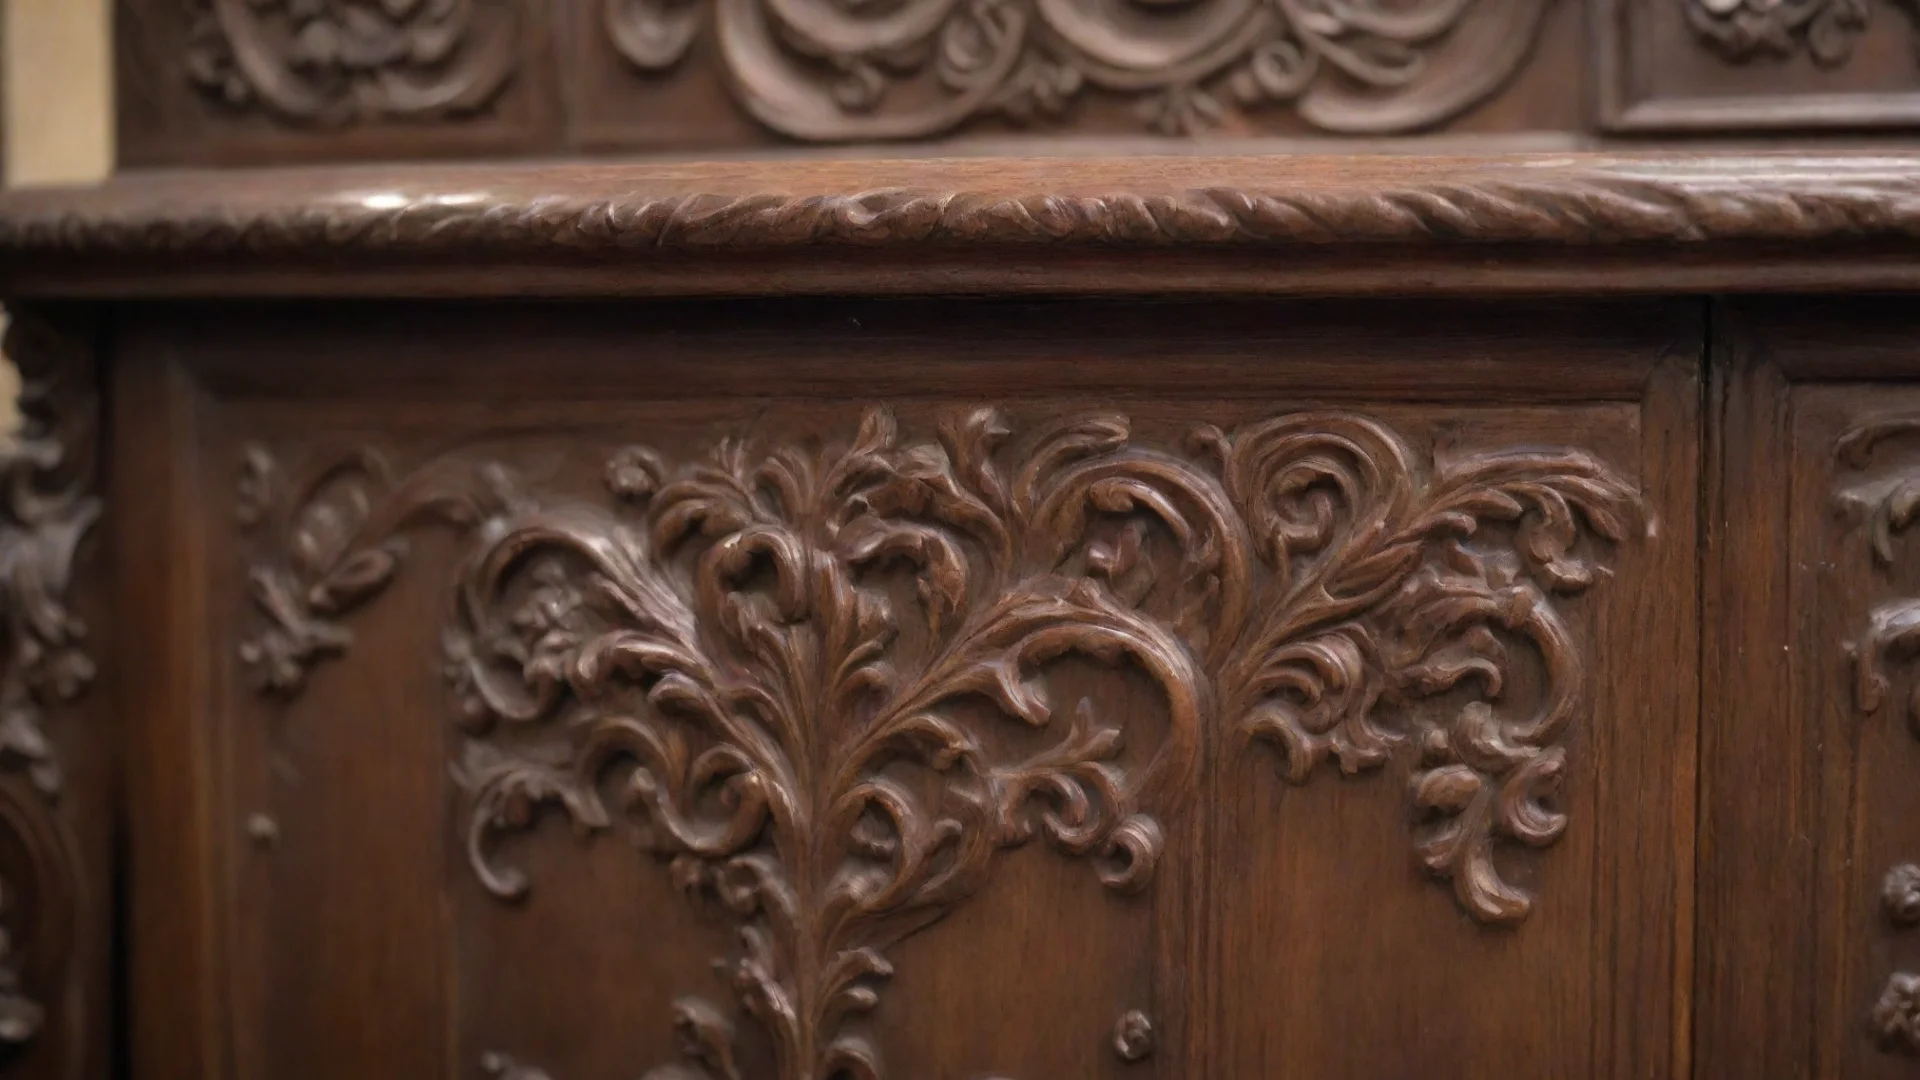 detail view of an ornate wooden cabinet dark brown at the edge blurred with high craftsmanship hdwidescreen